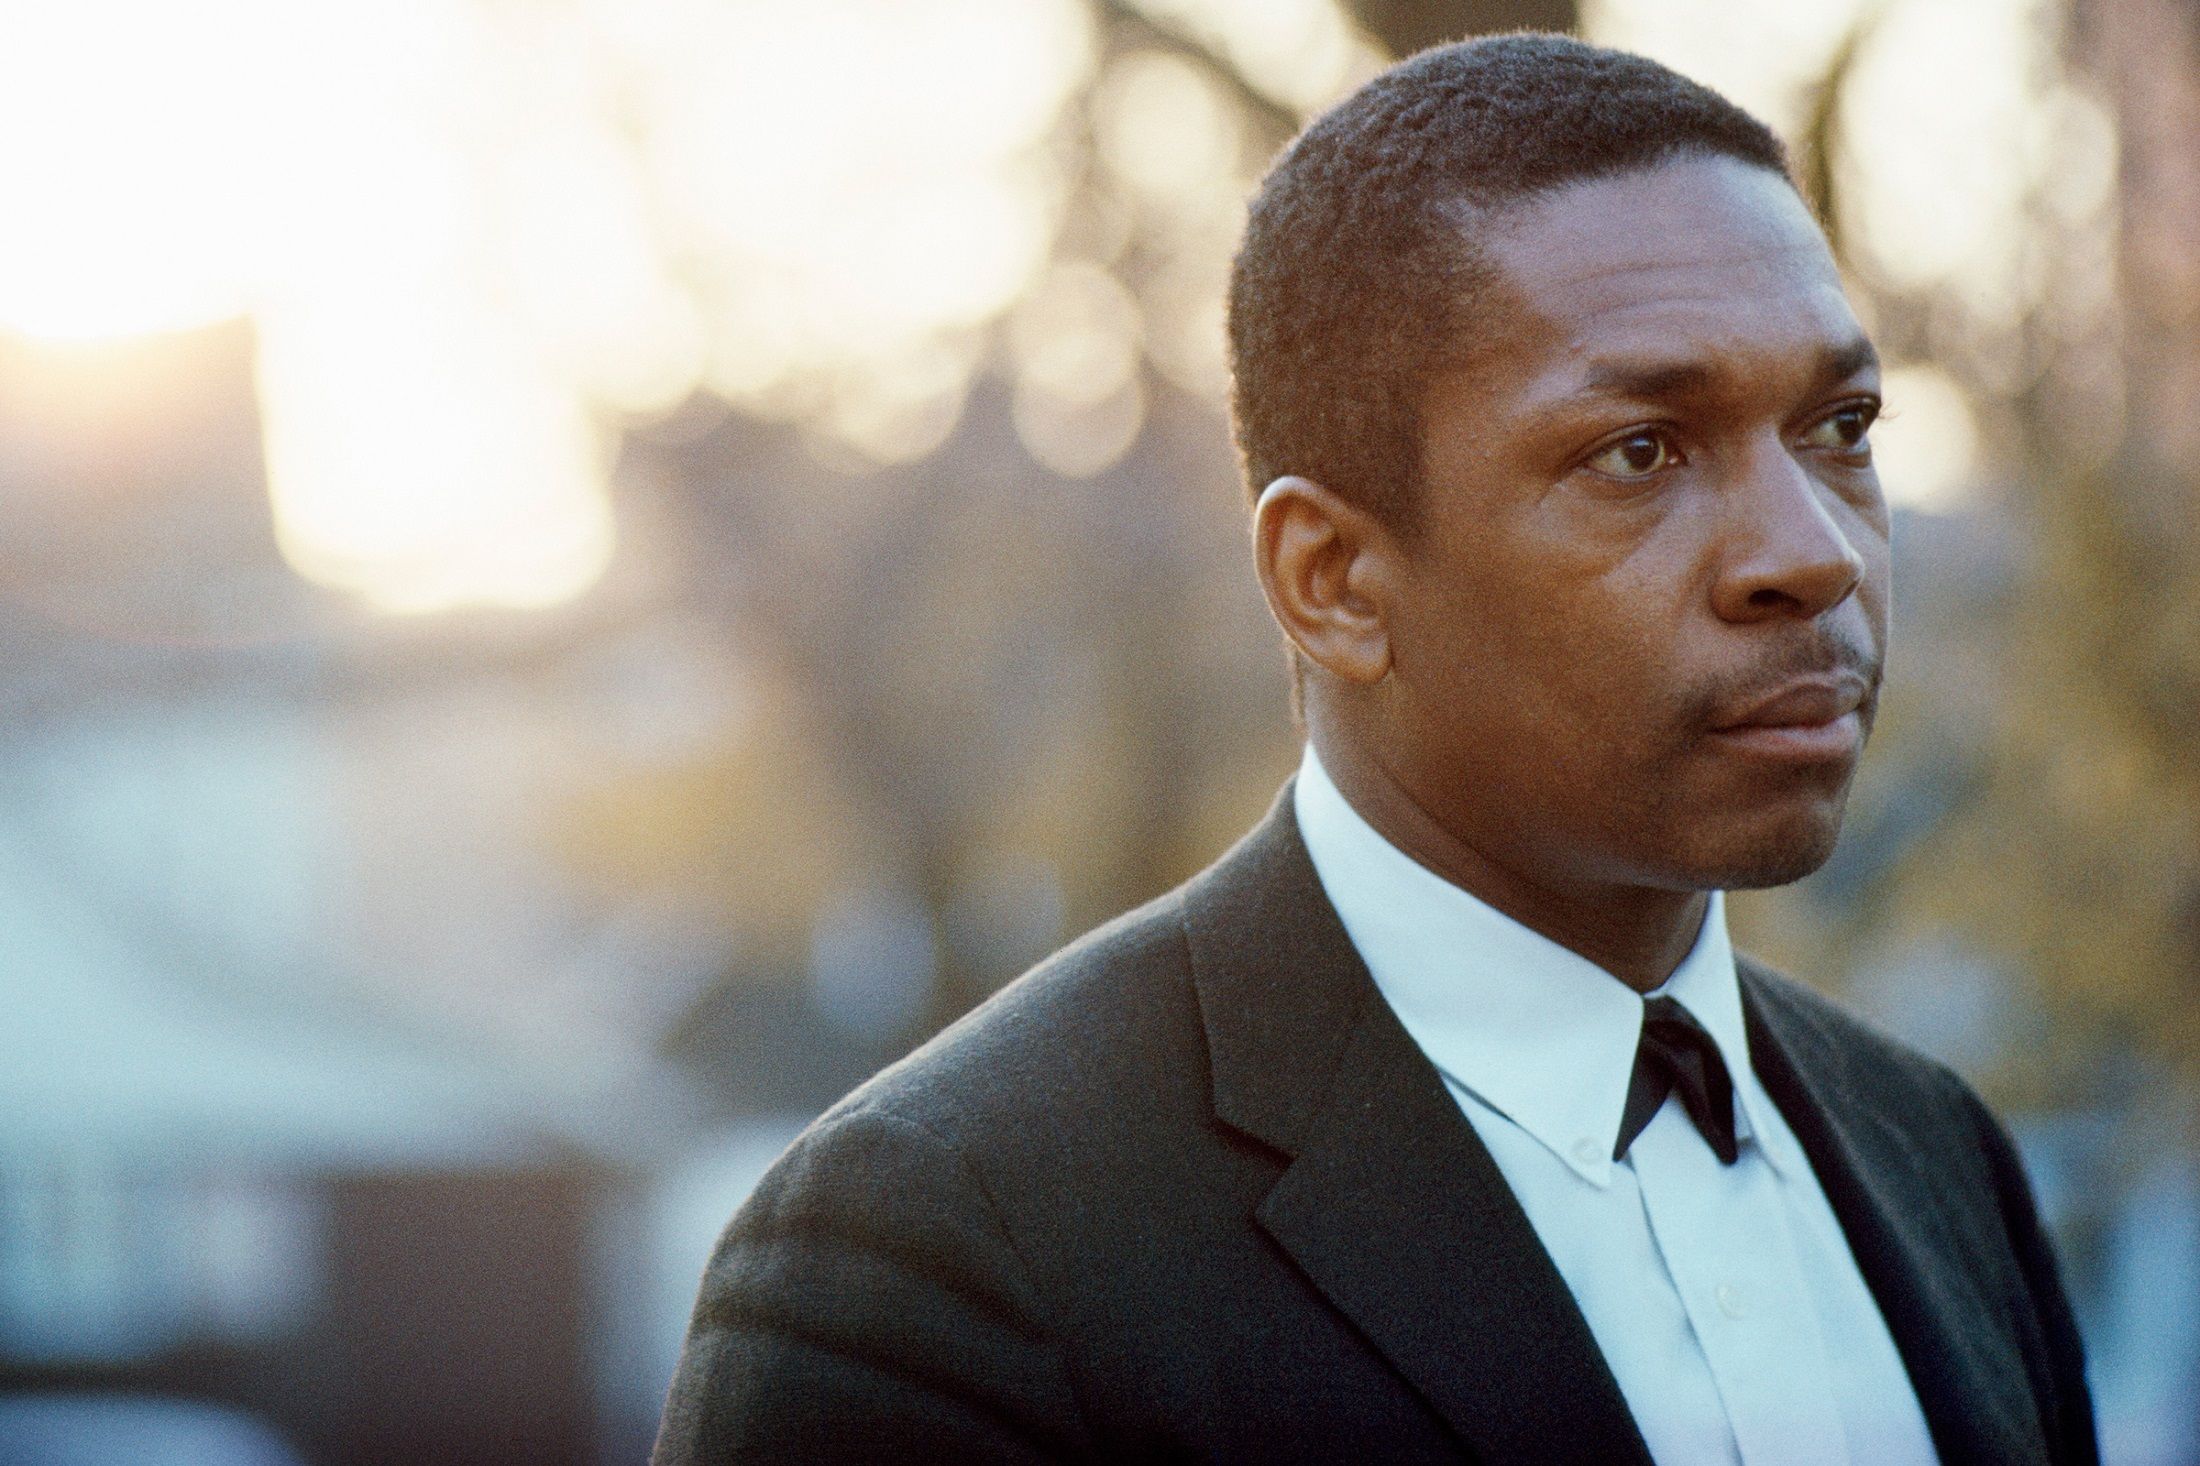 John Coltrane’s “new” album is really just a commercial gimmick